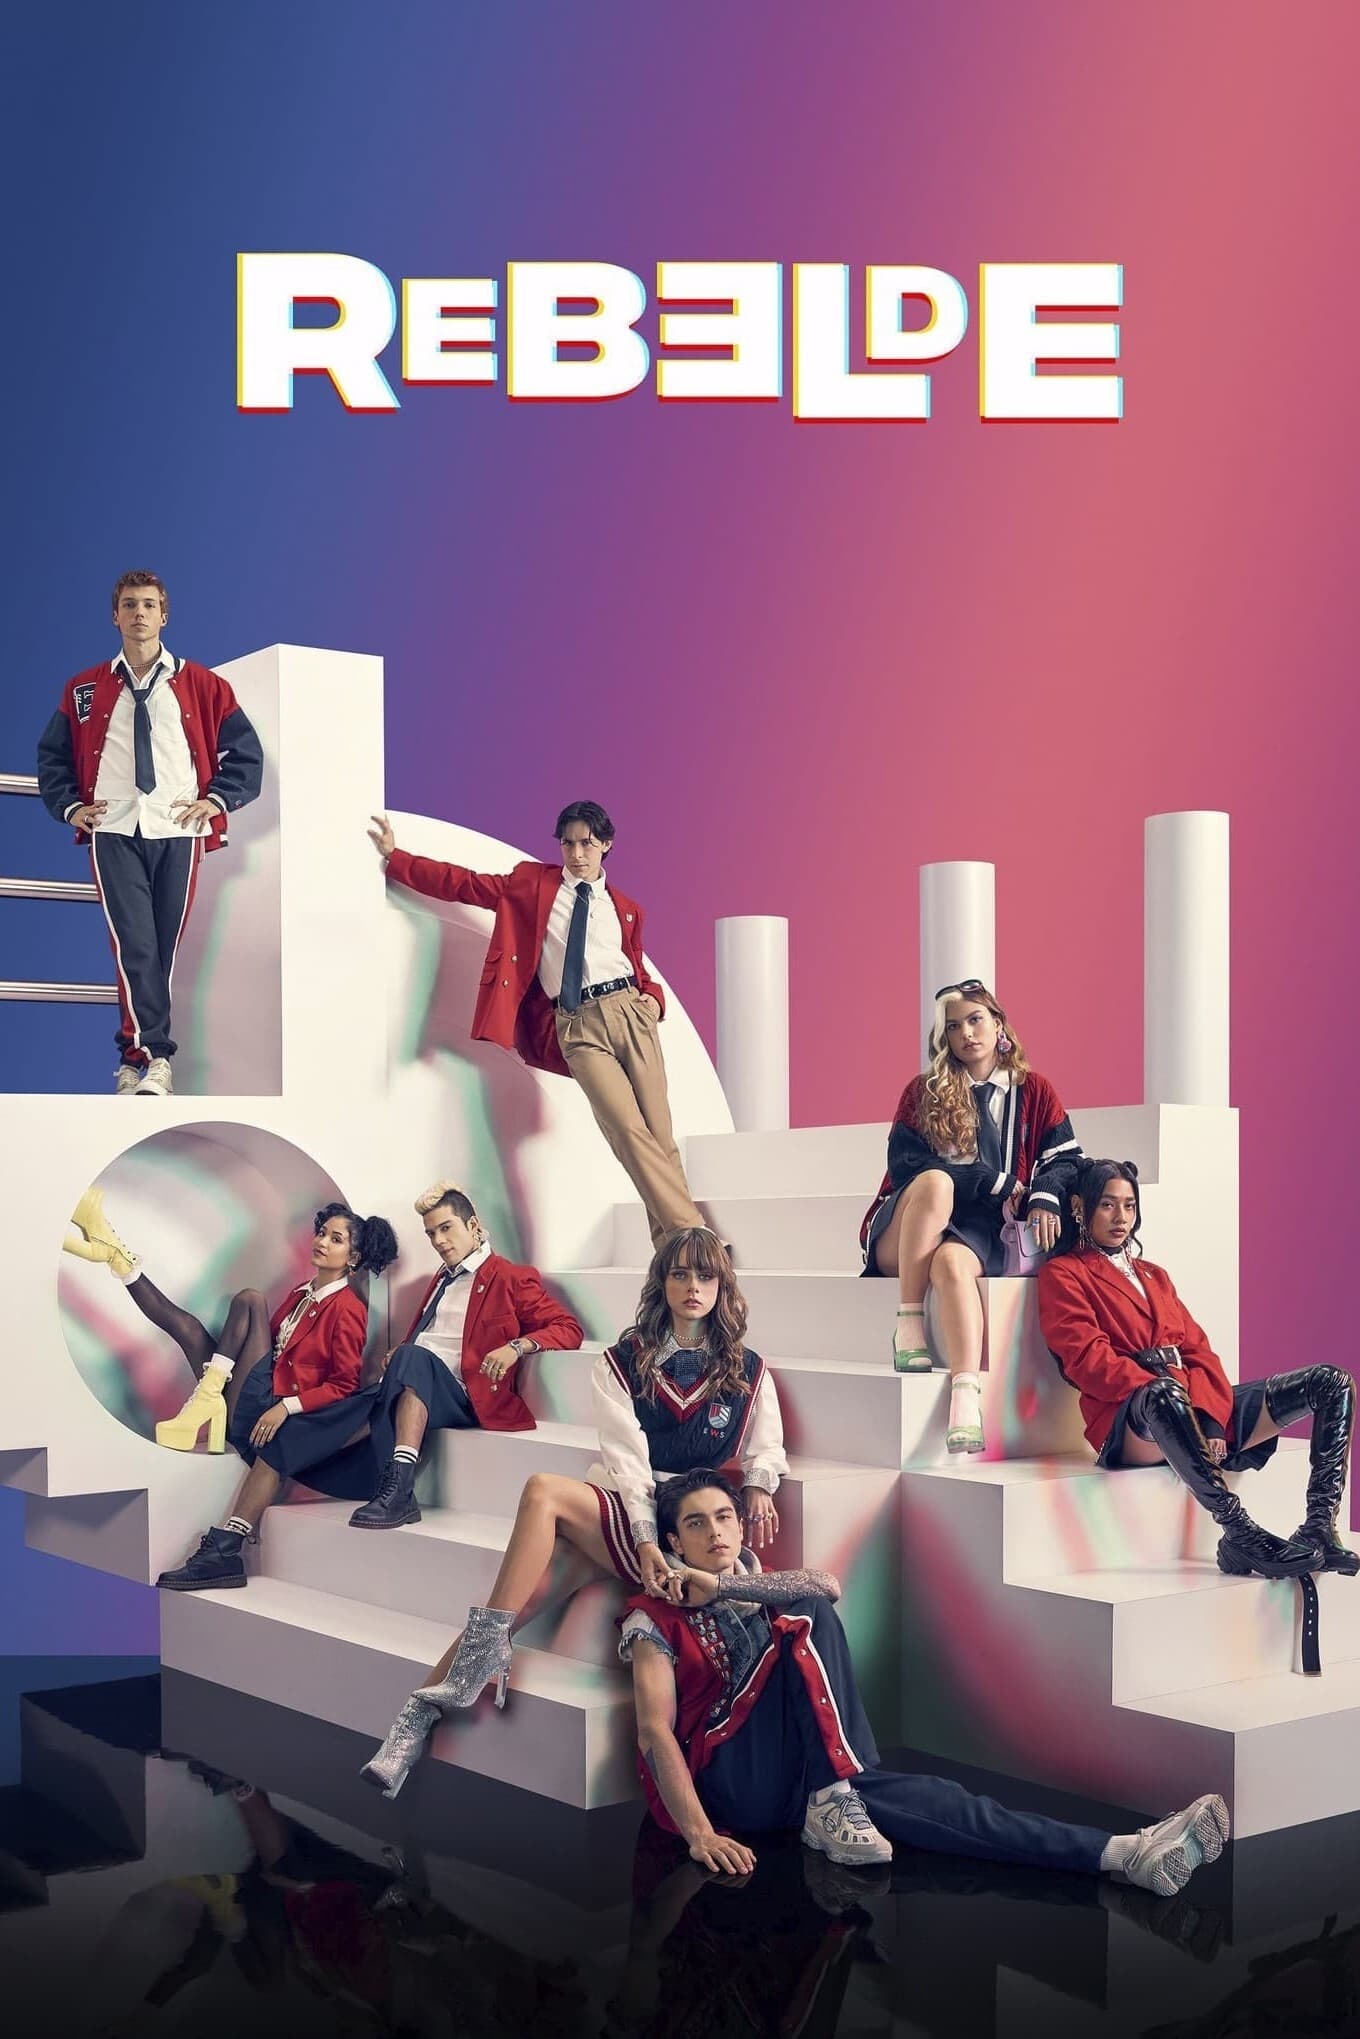 Rebelde TV Shows About Reboot